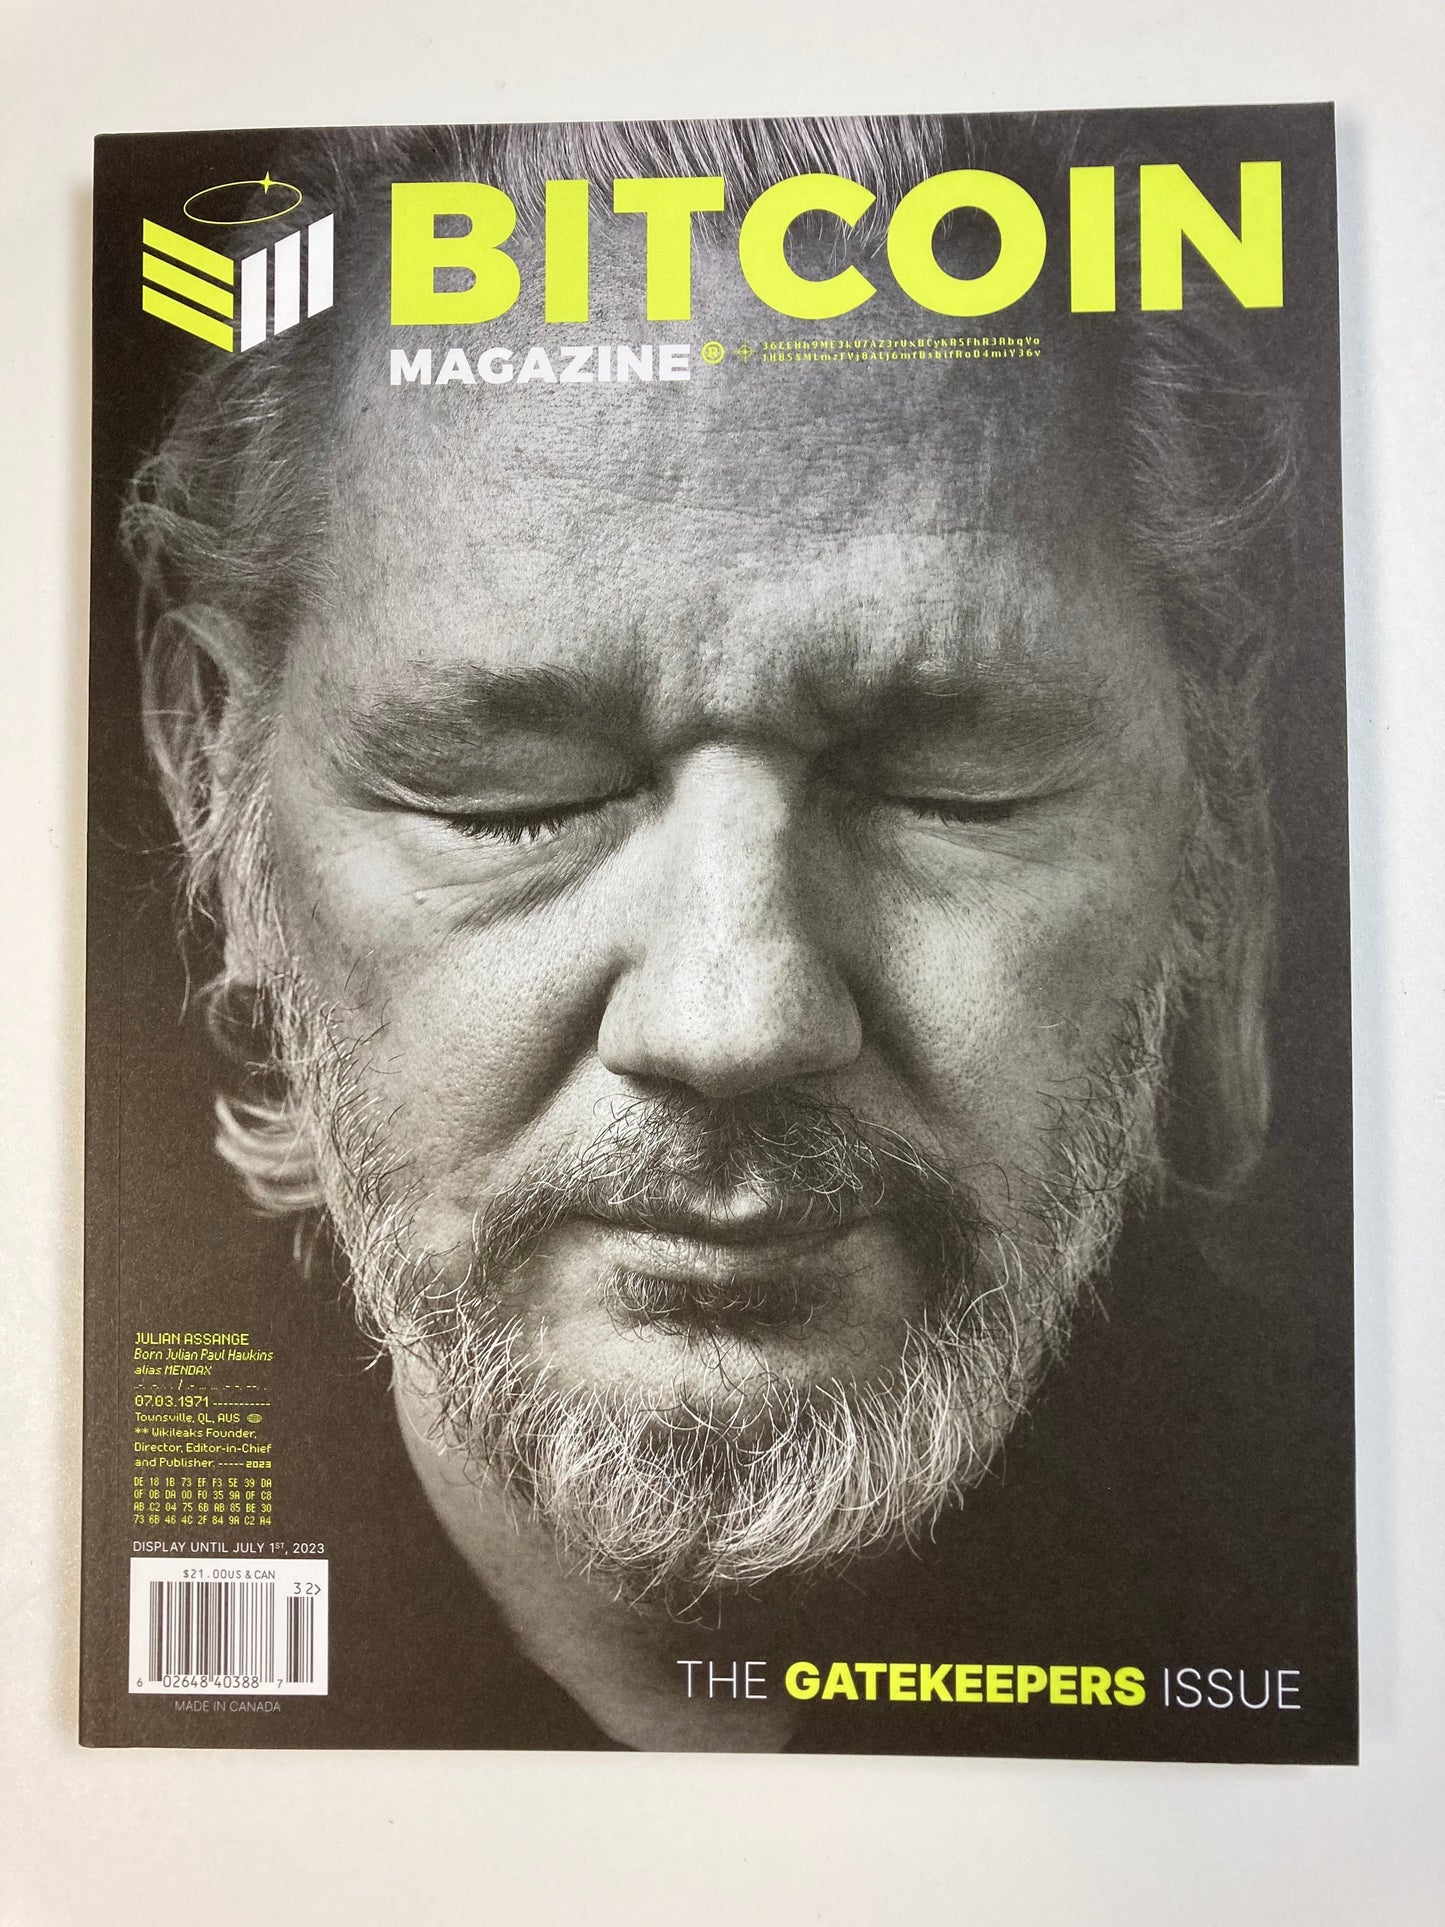 Bitcoin Magazine - The Gatekeepers Issue